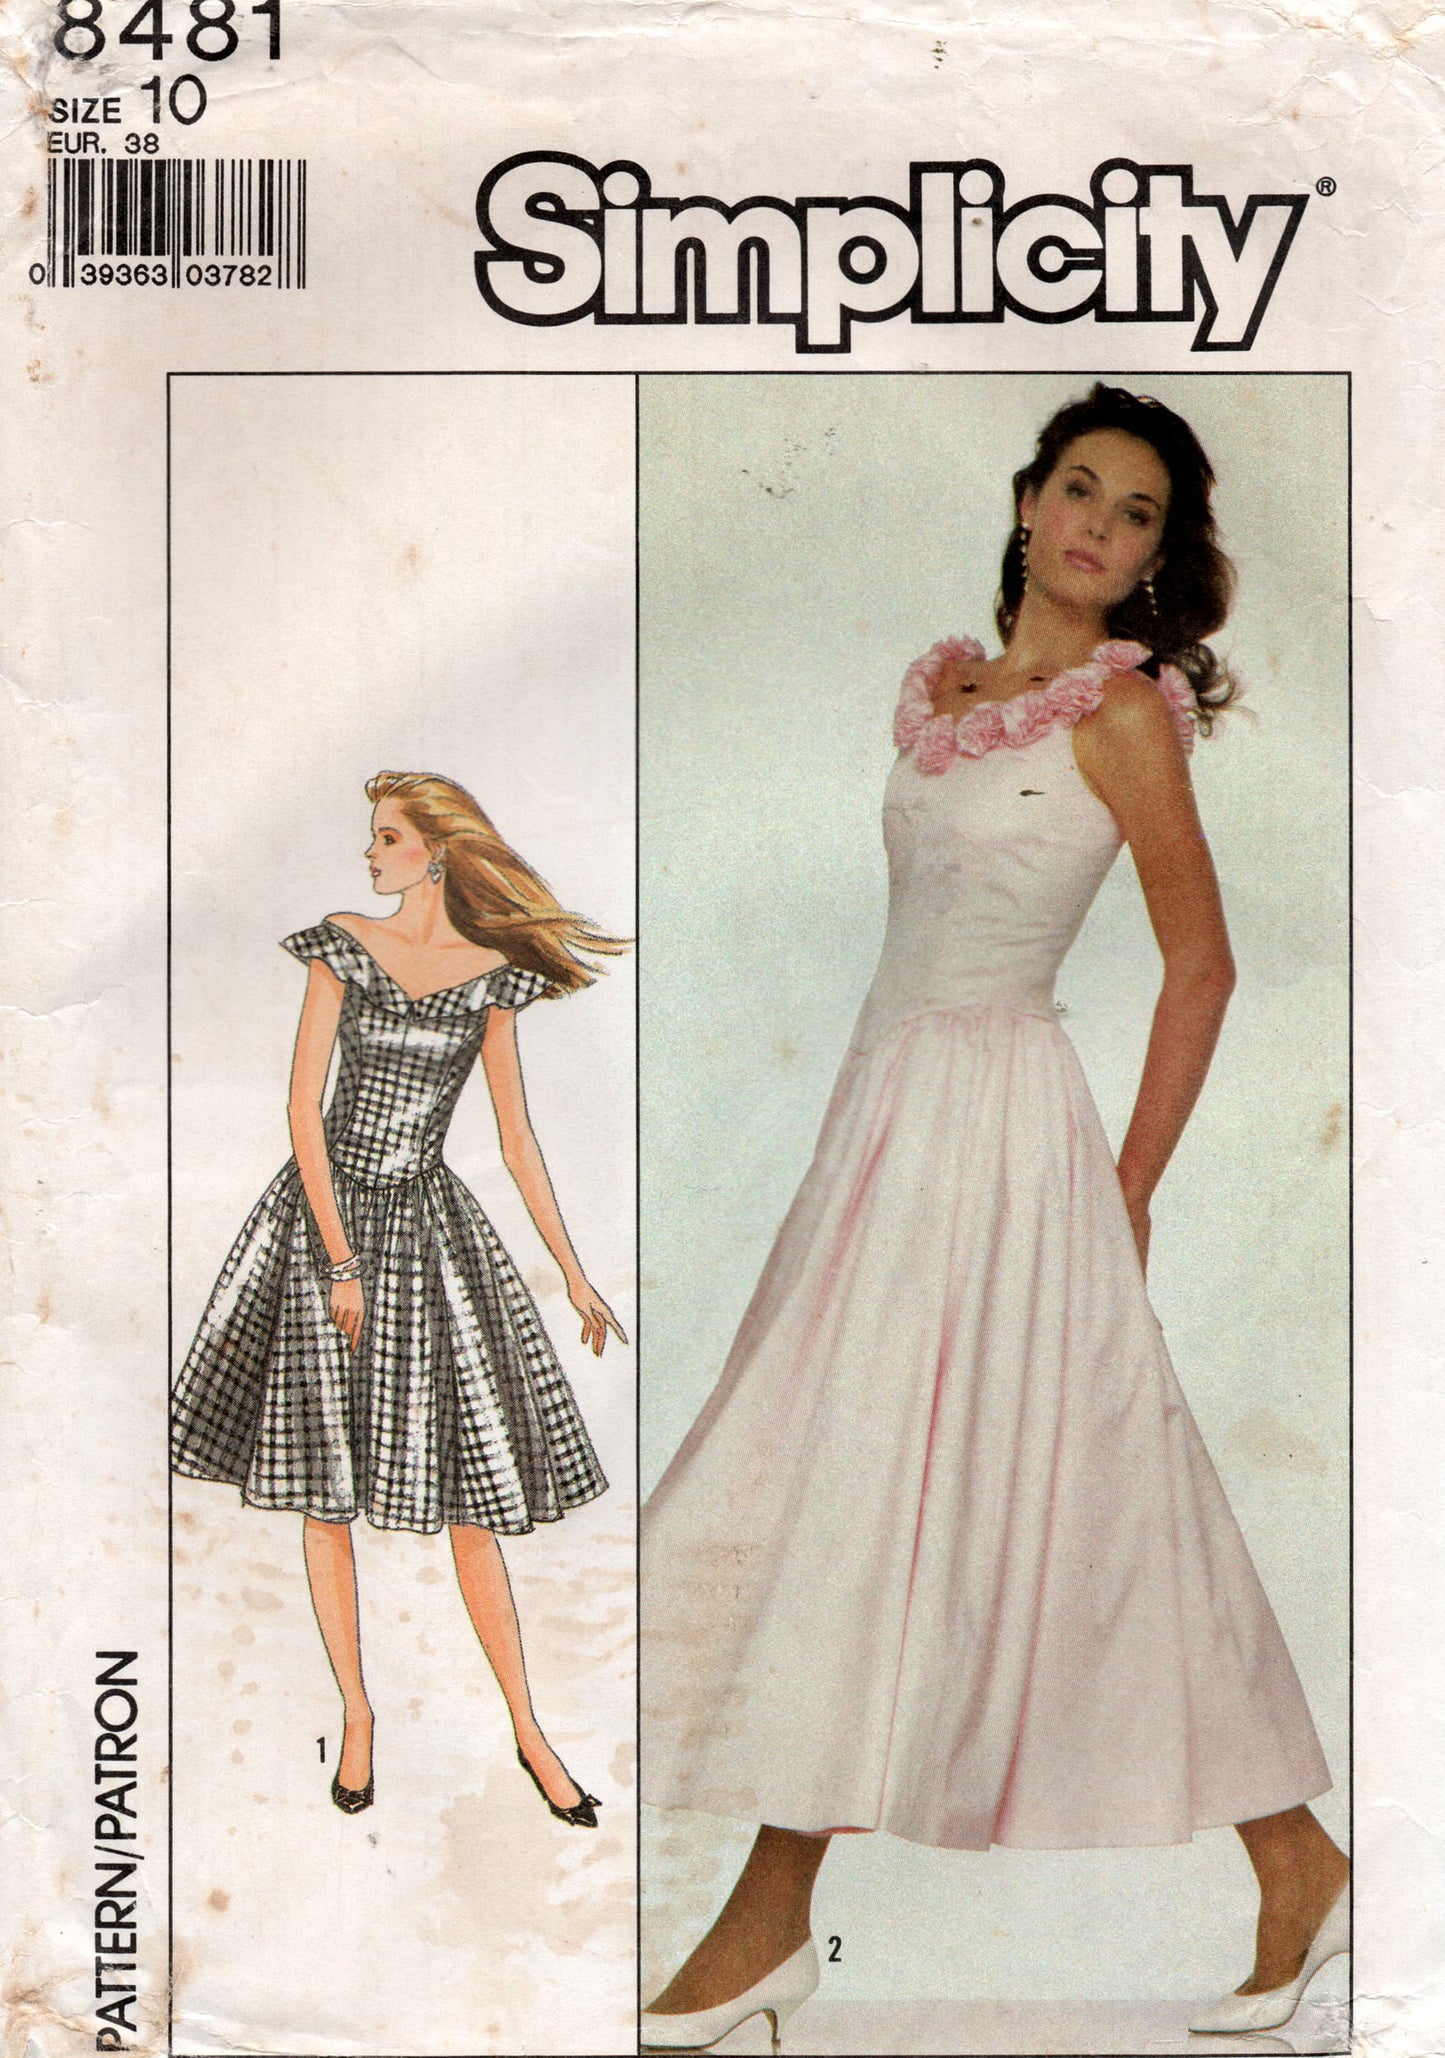 Simplicity 8481 Womens Full Skirt Evening Dress 1980s Vintage Sewing Pattern Size 10 bust 32.5 Inches